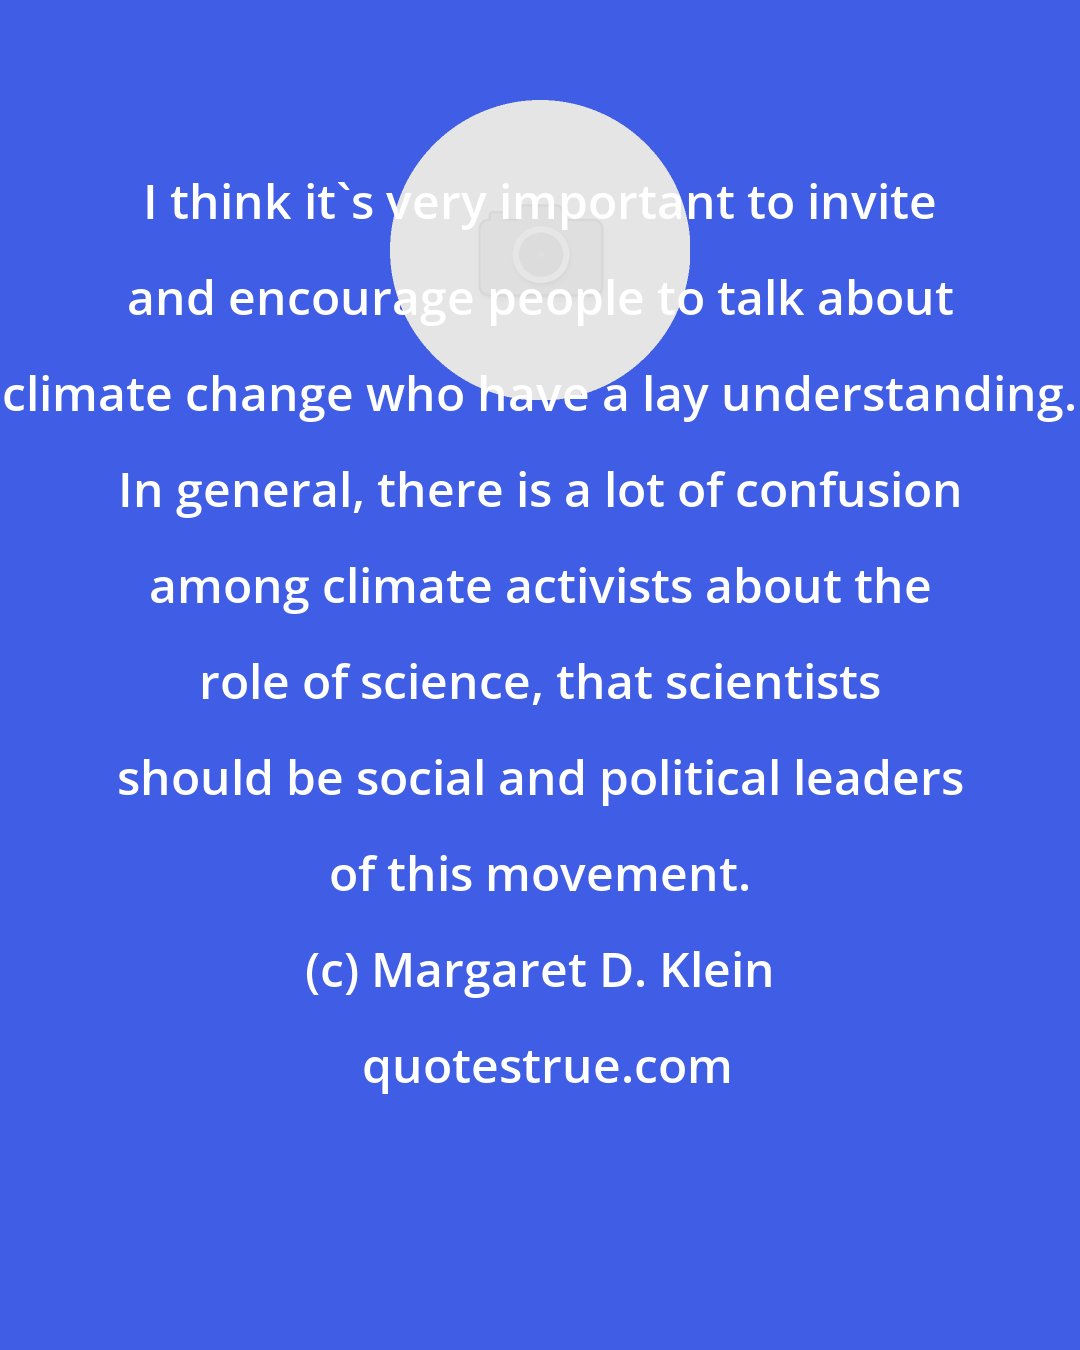 Margaret D. Klein: I think it's very important to invite and encourage people to talk about climate change who have a lay understanding. In general, there is a lot of confusion among climate activists about the role of science, that scientists should be social and political leaders of this movement.